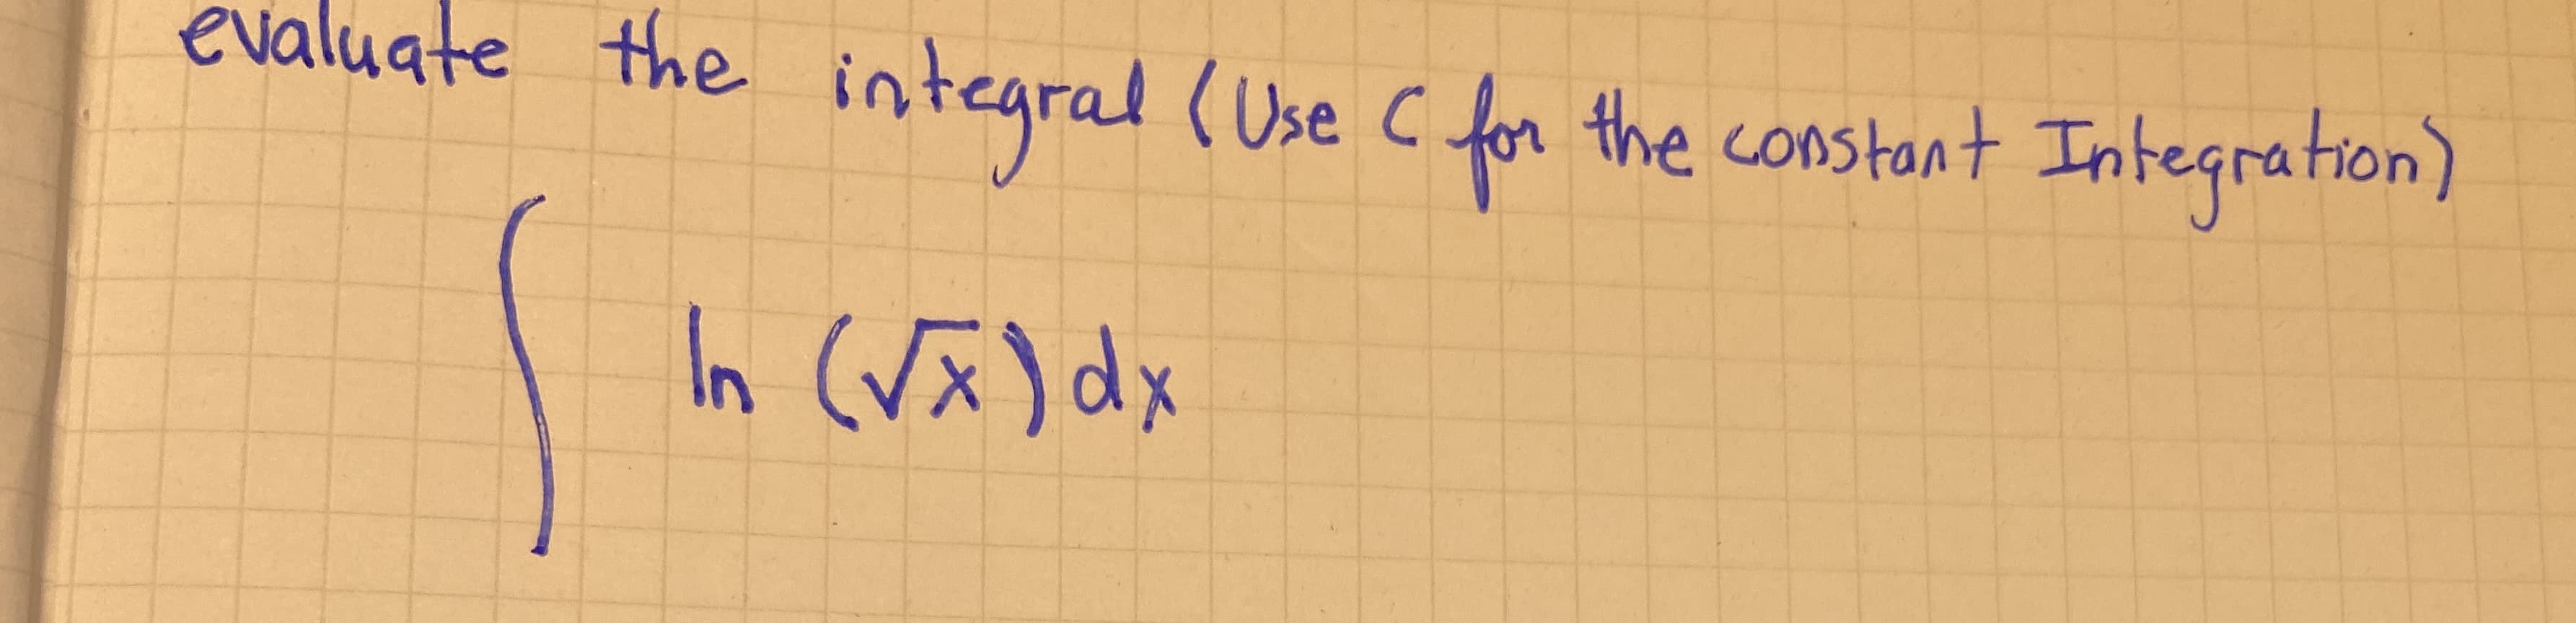 ite the
integral (Use C for the constant Integration)
In Vx)dx
